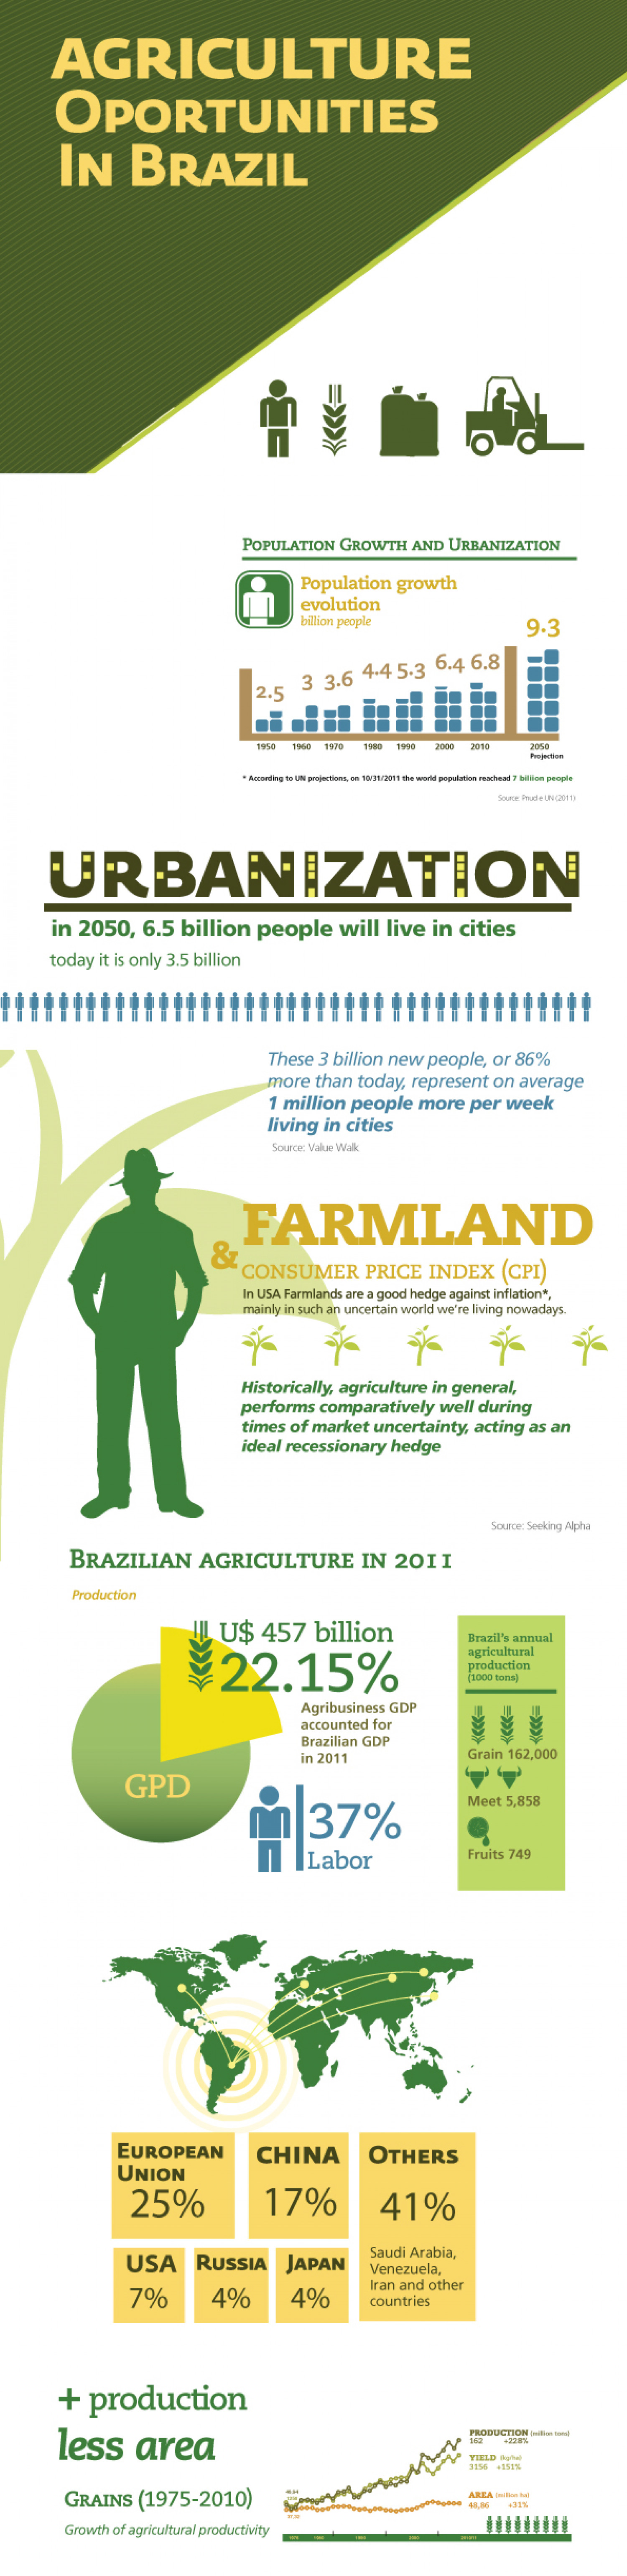 Agriculture Oportunities in Brazil Infographic